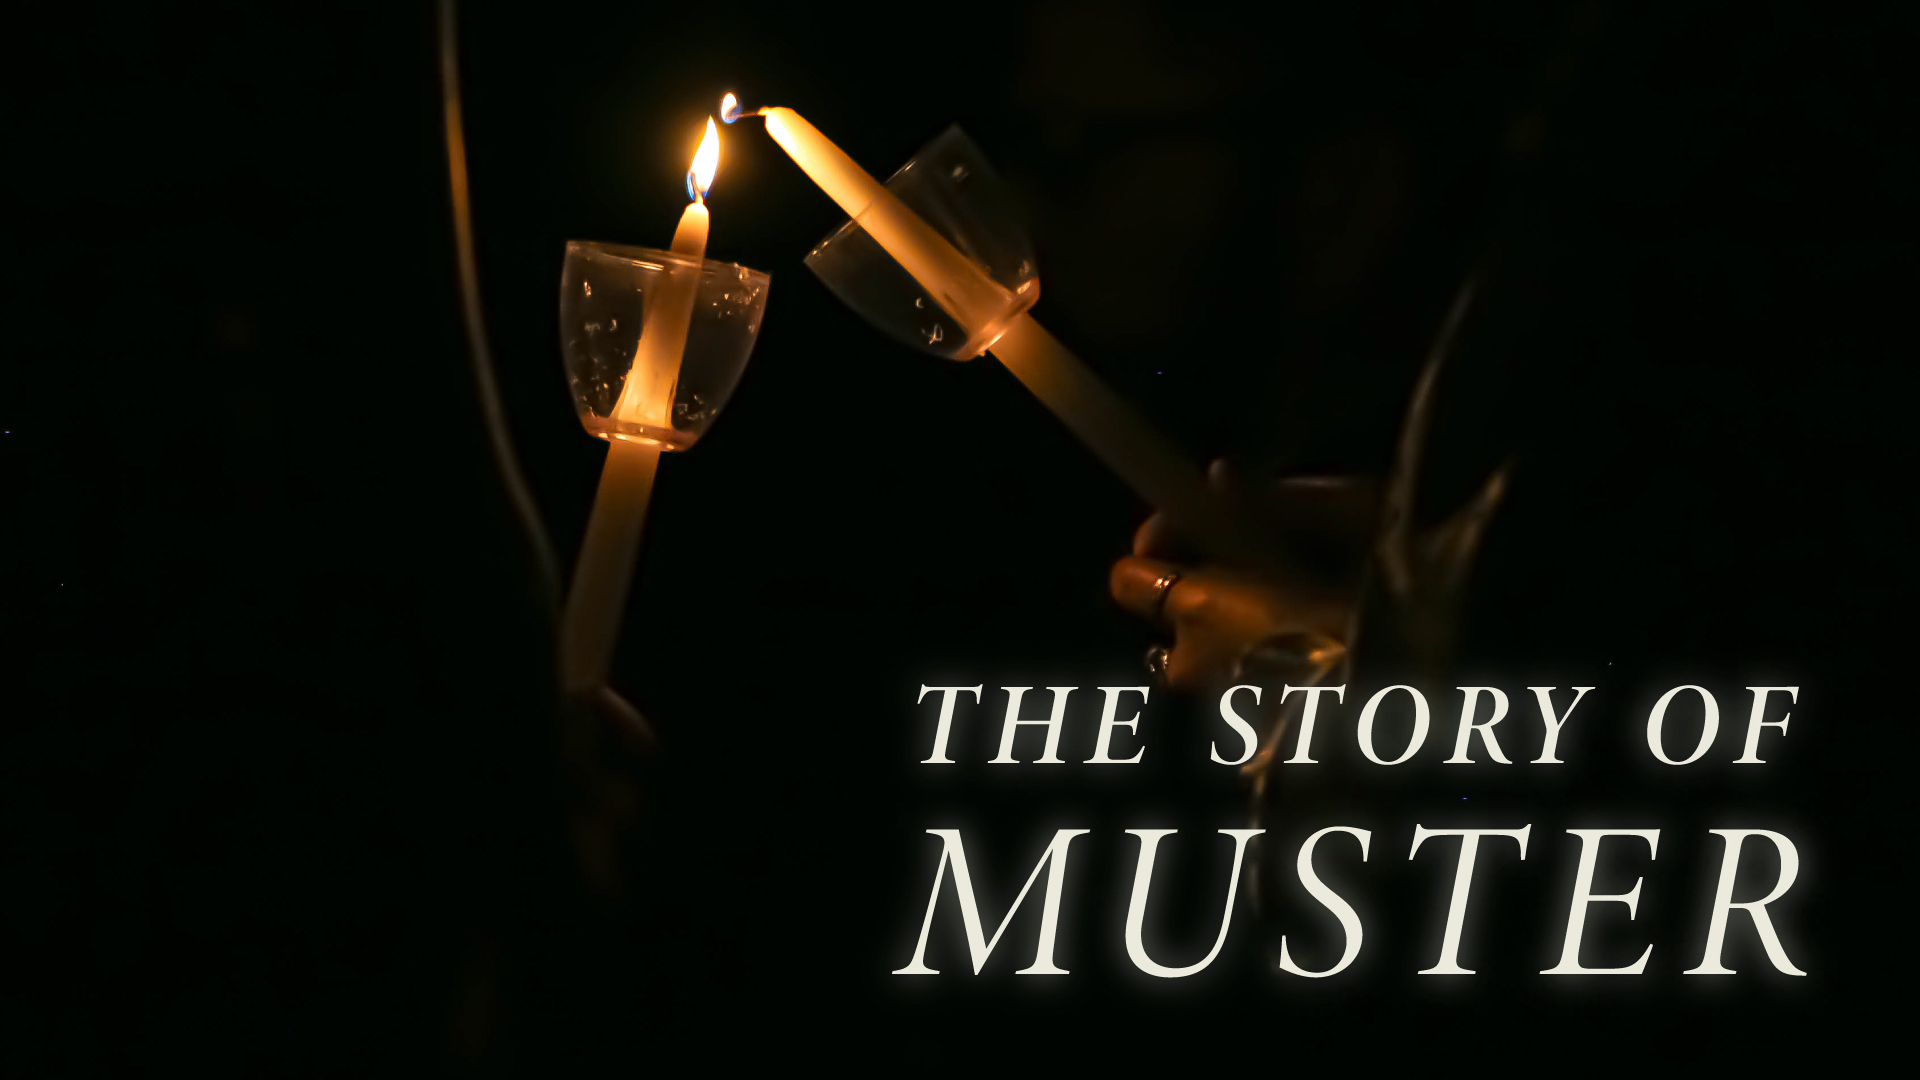 The story of Muster